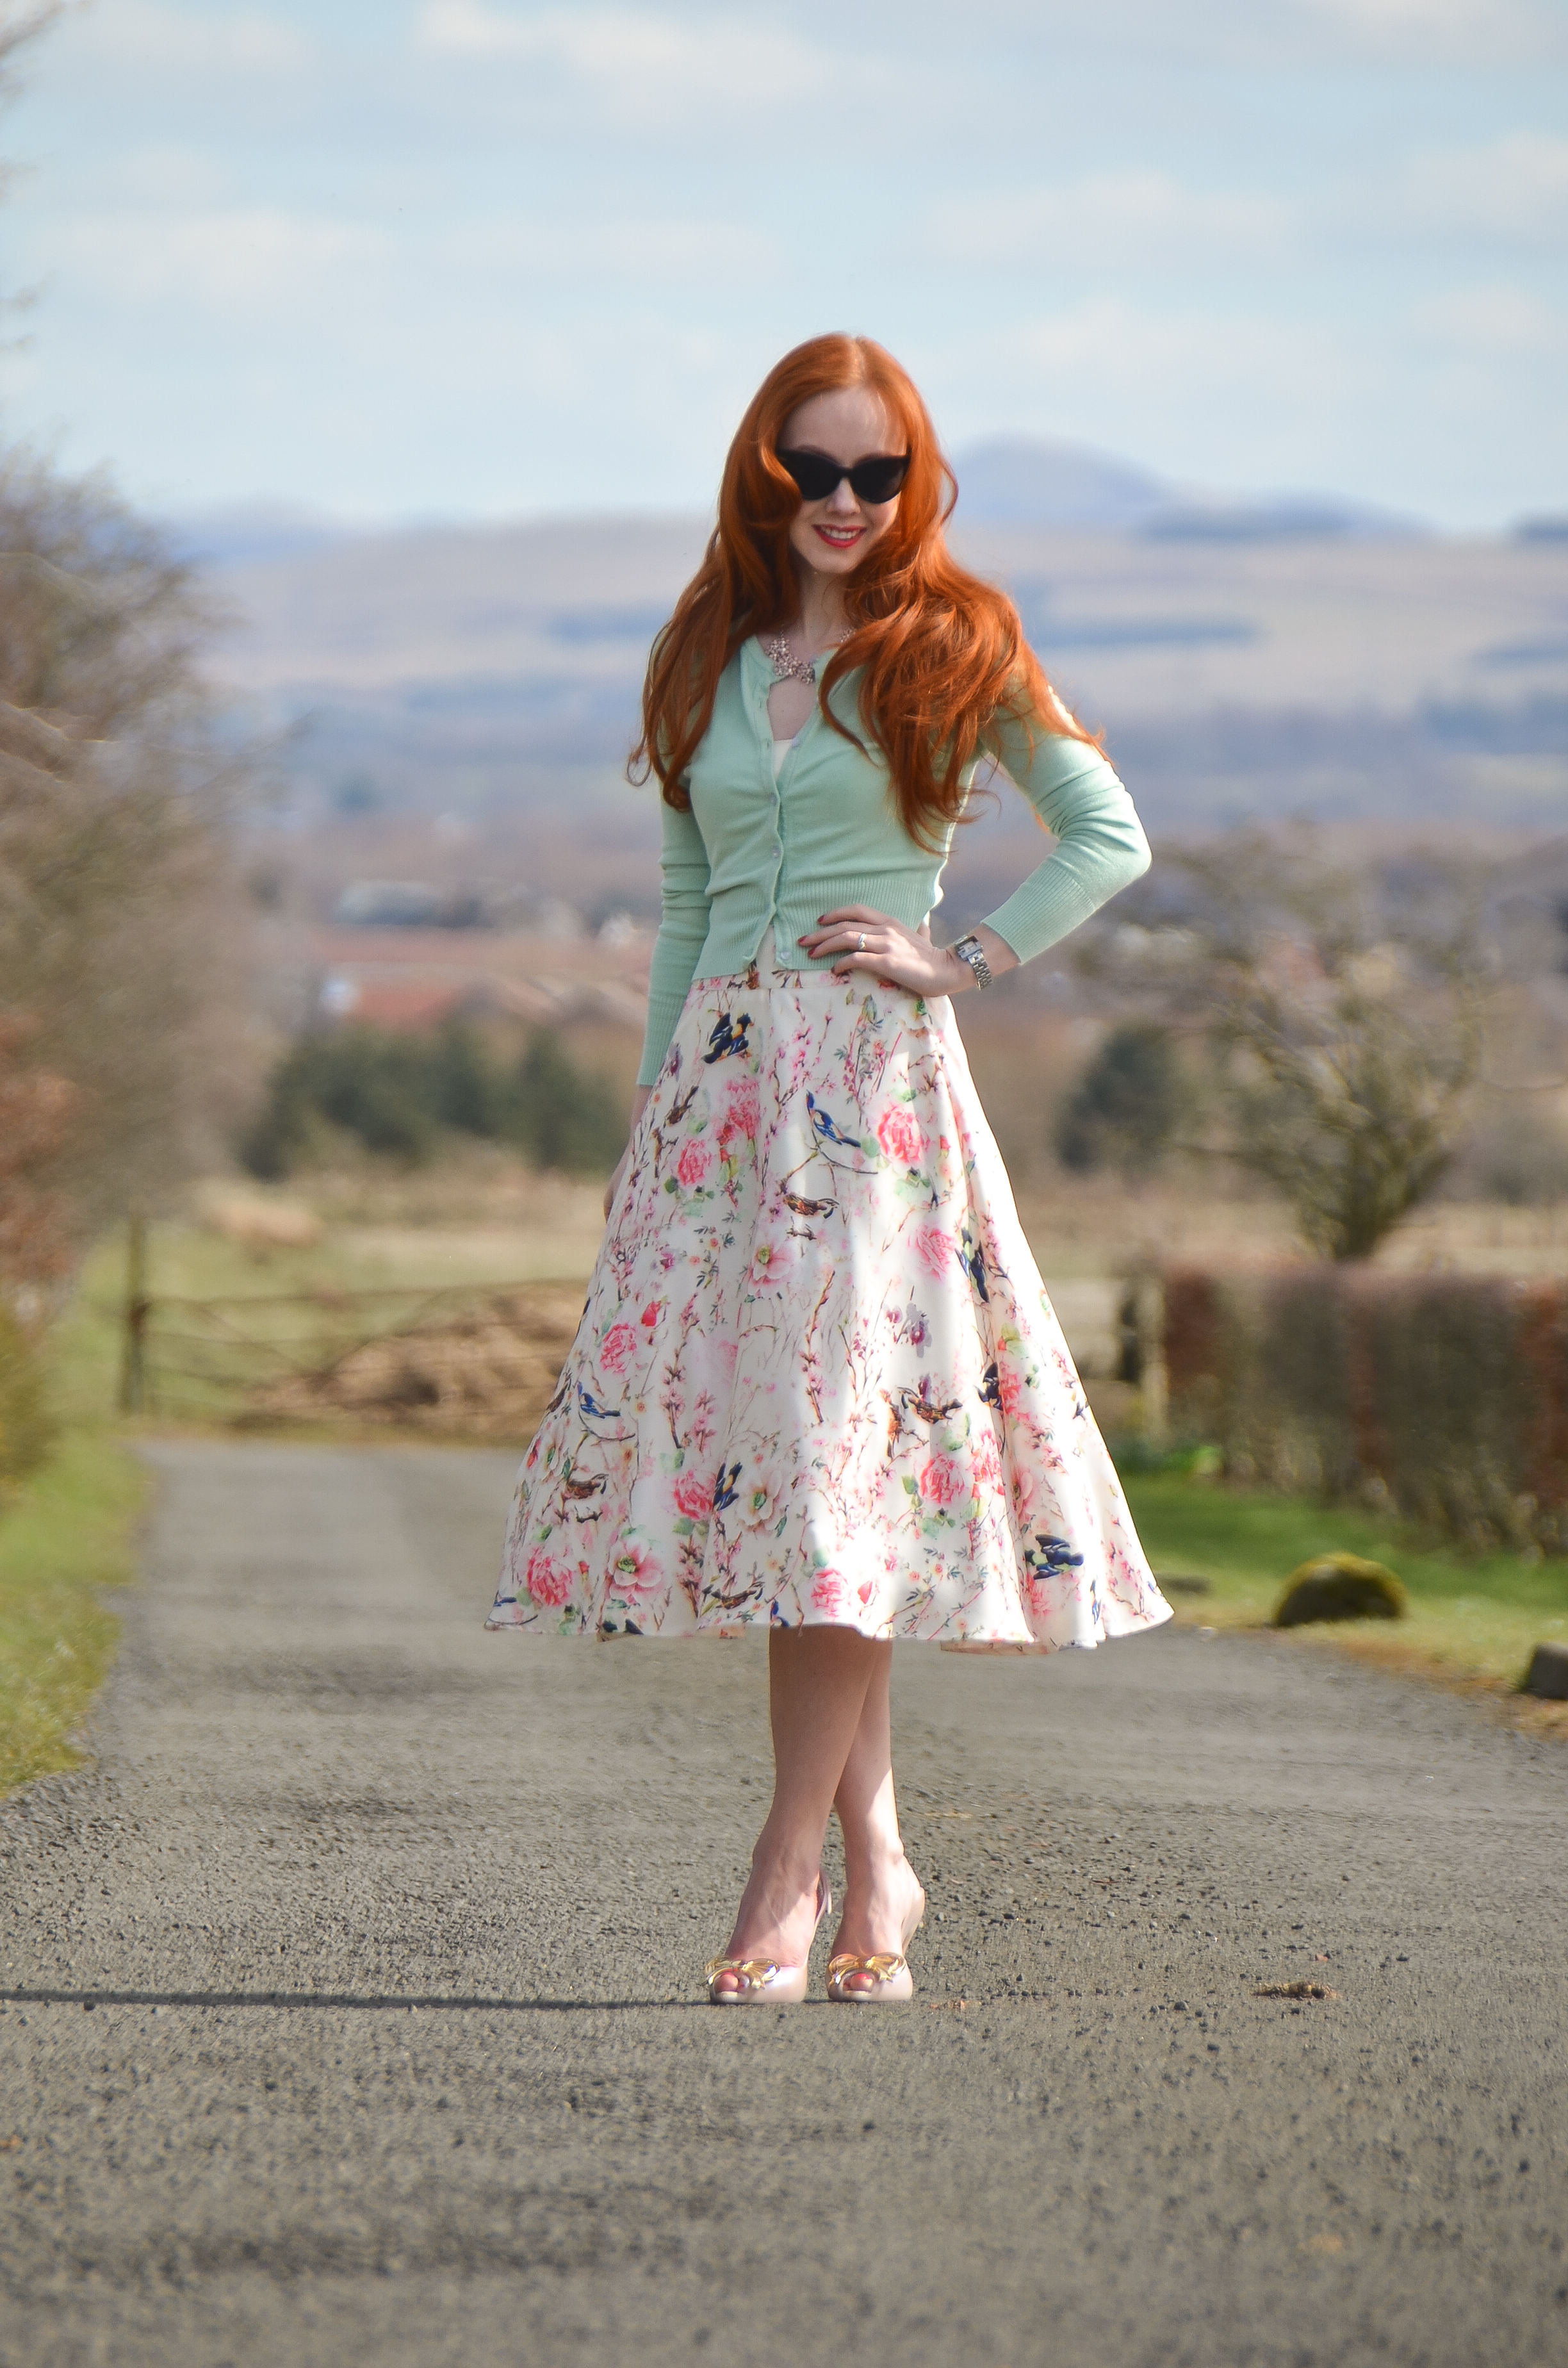 Vintage floral skirt outfit